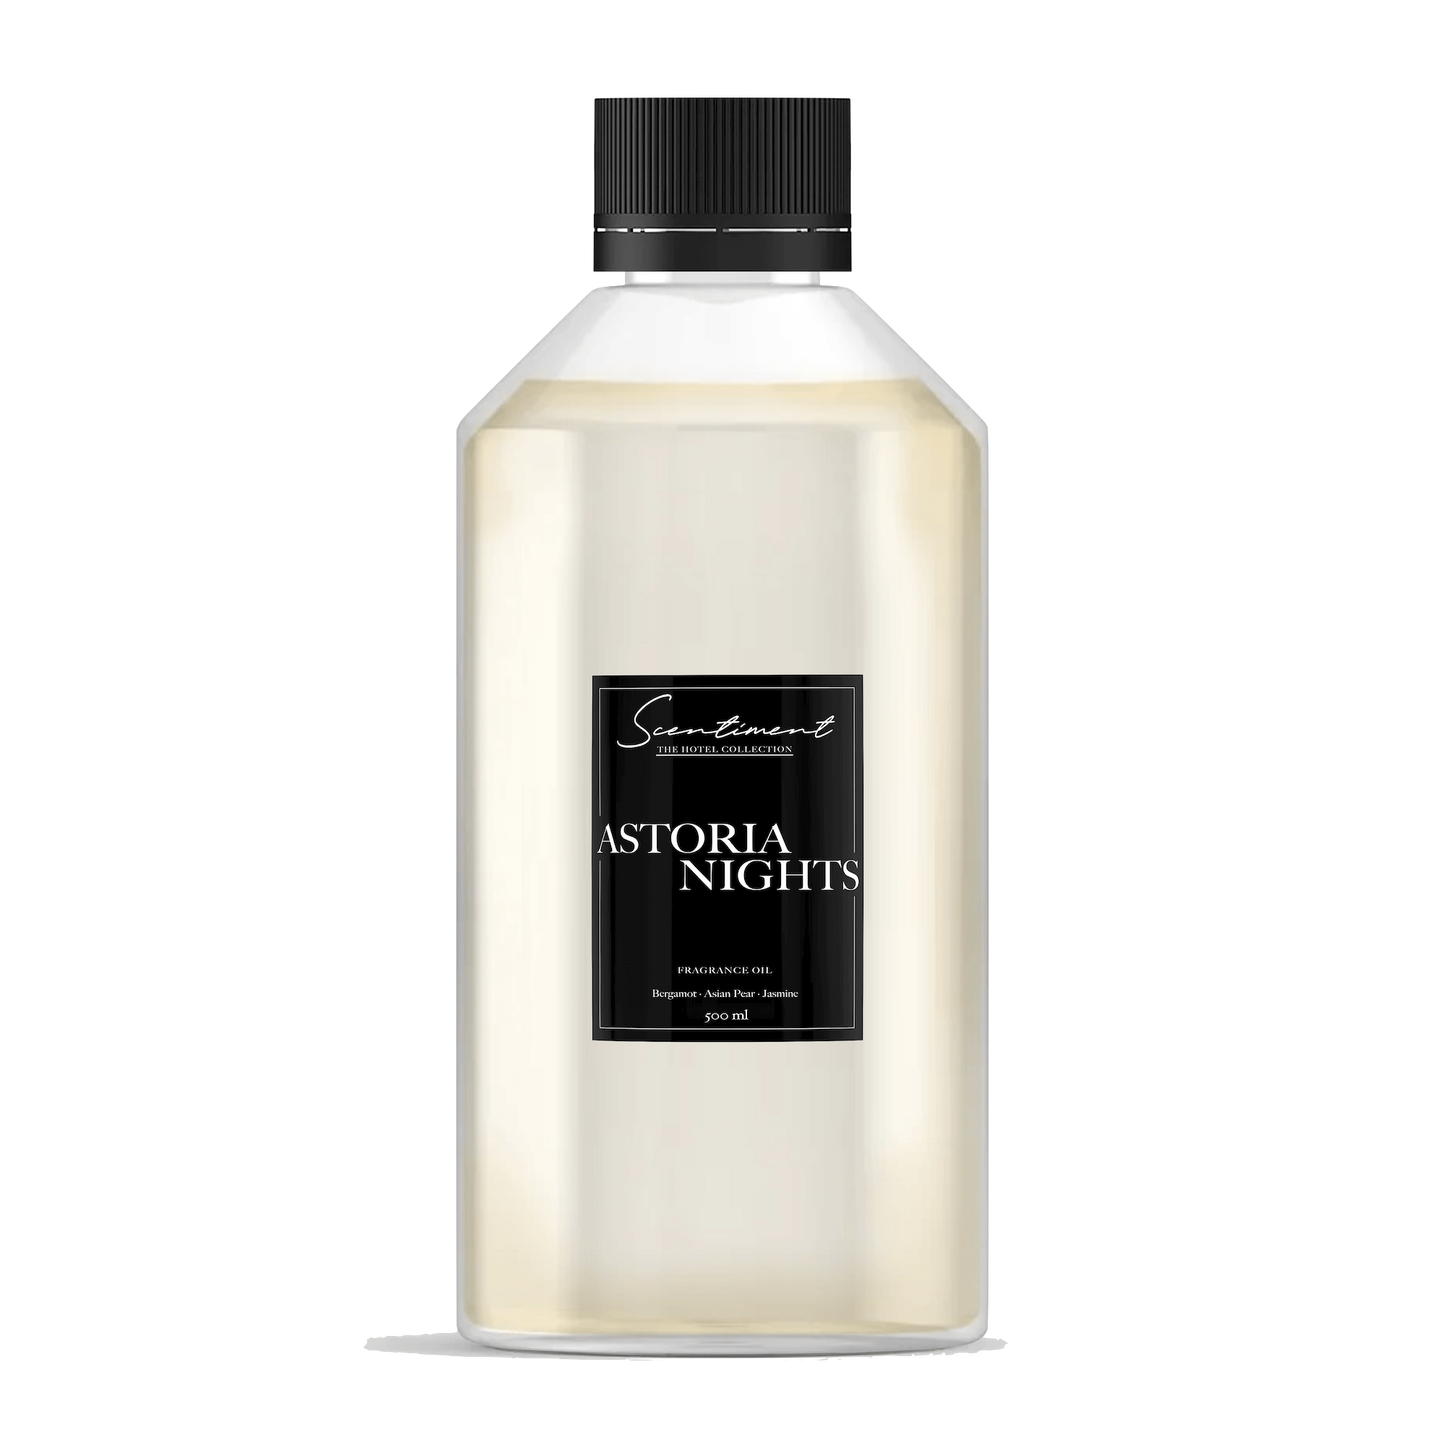 Astoria Nights Fragrance Oil inspired by Waldorf Astoria ® with notes of Bergamot, Asian Pear, and Jasmine.